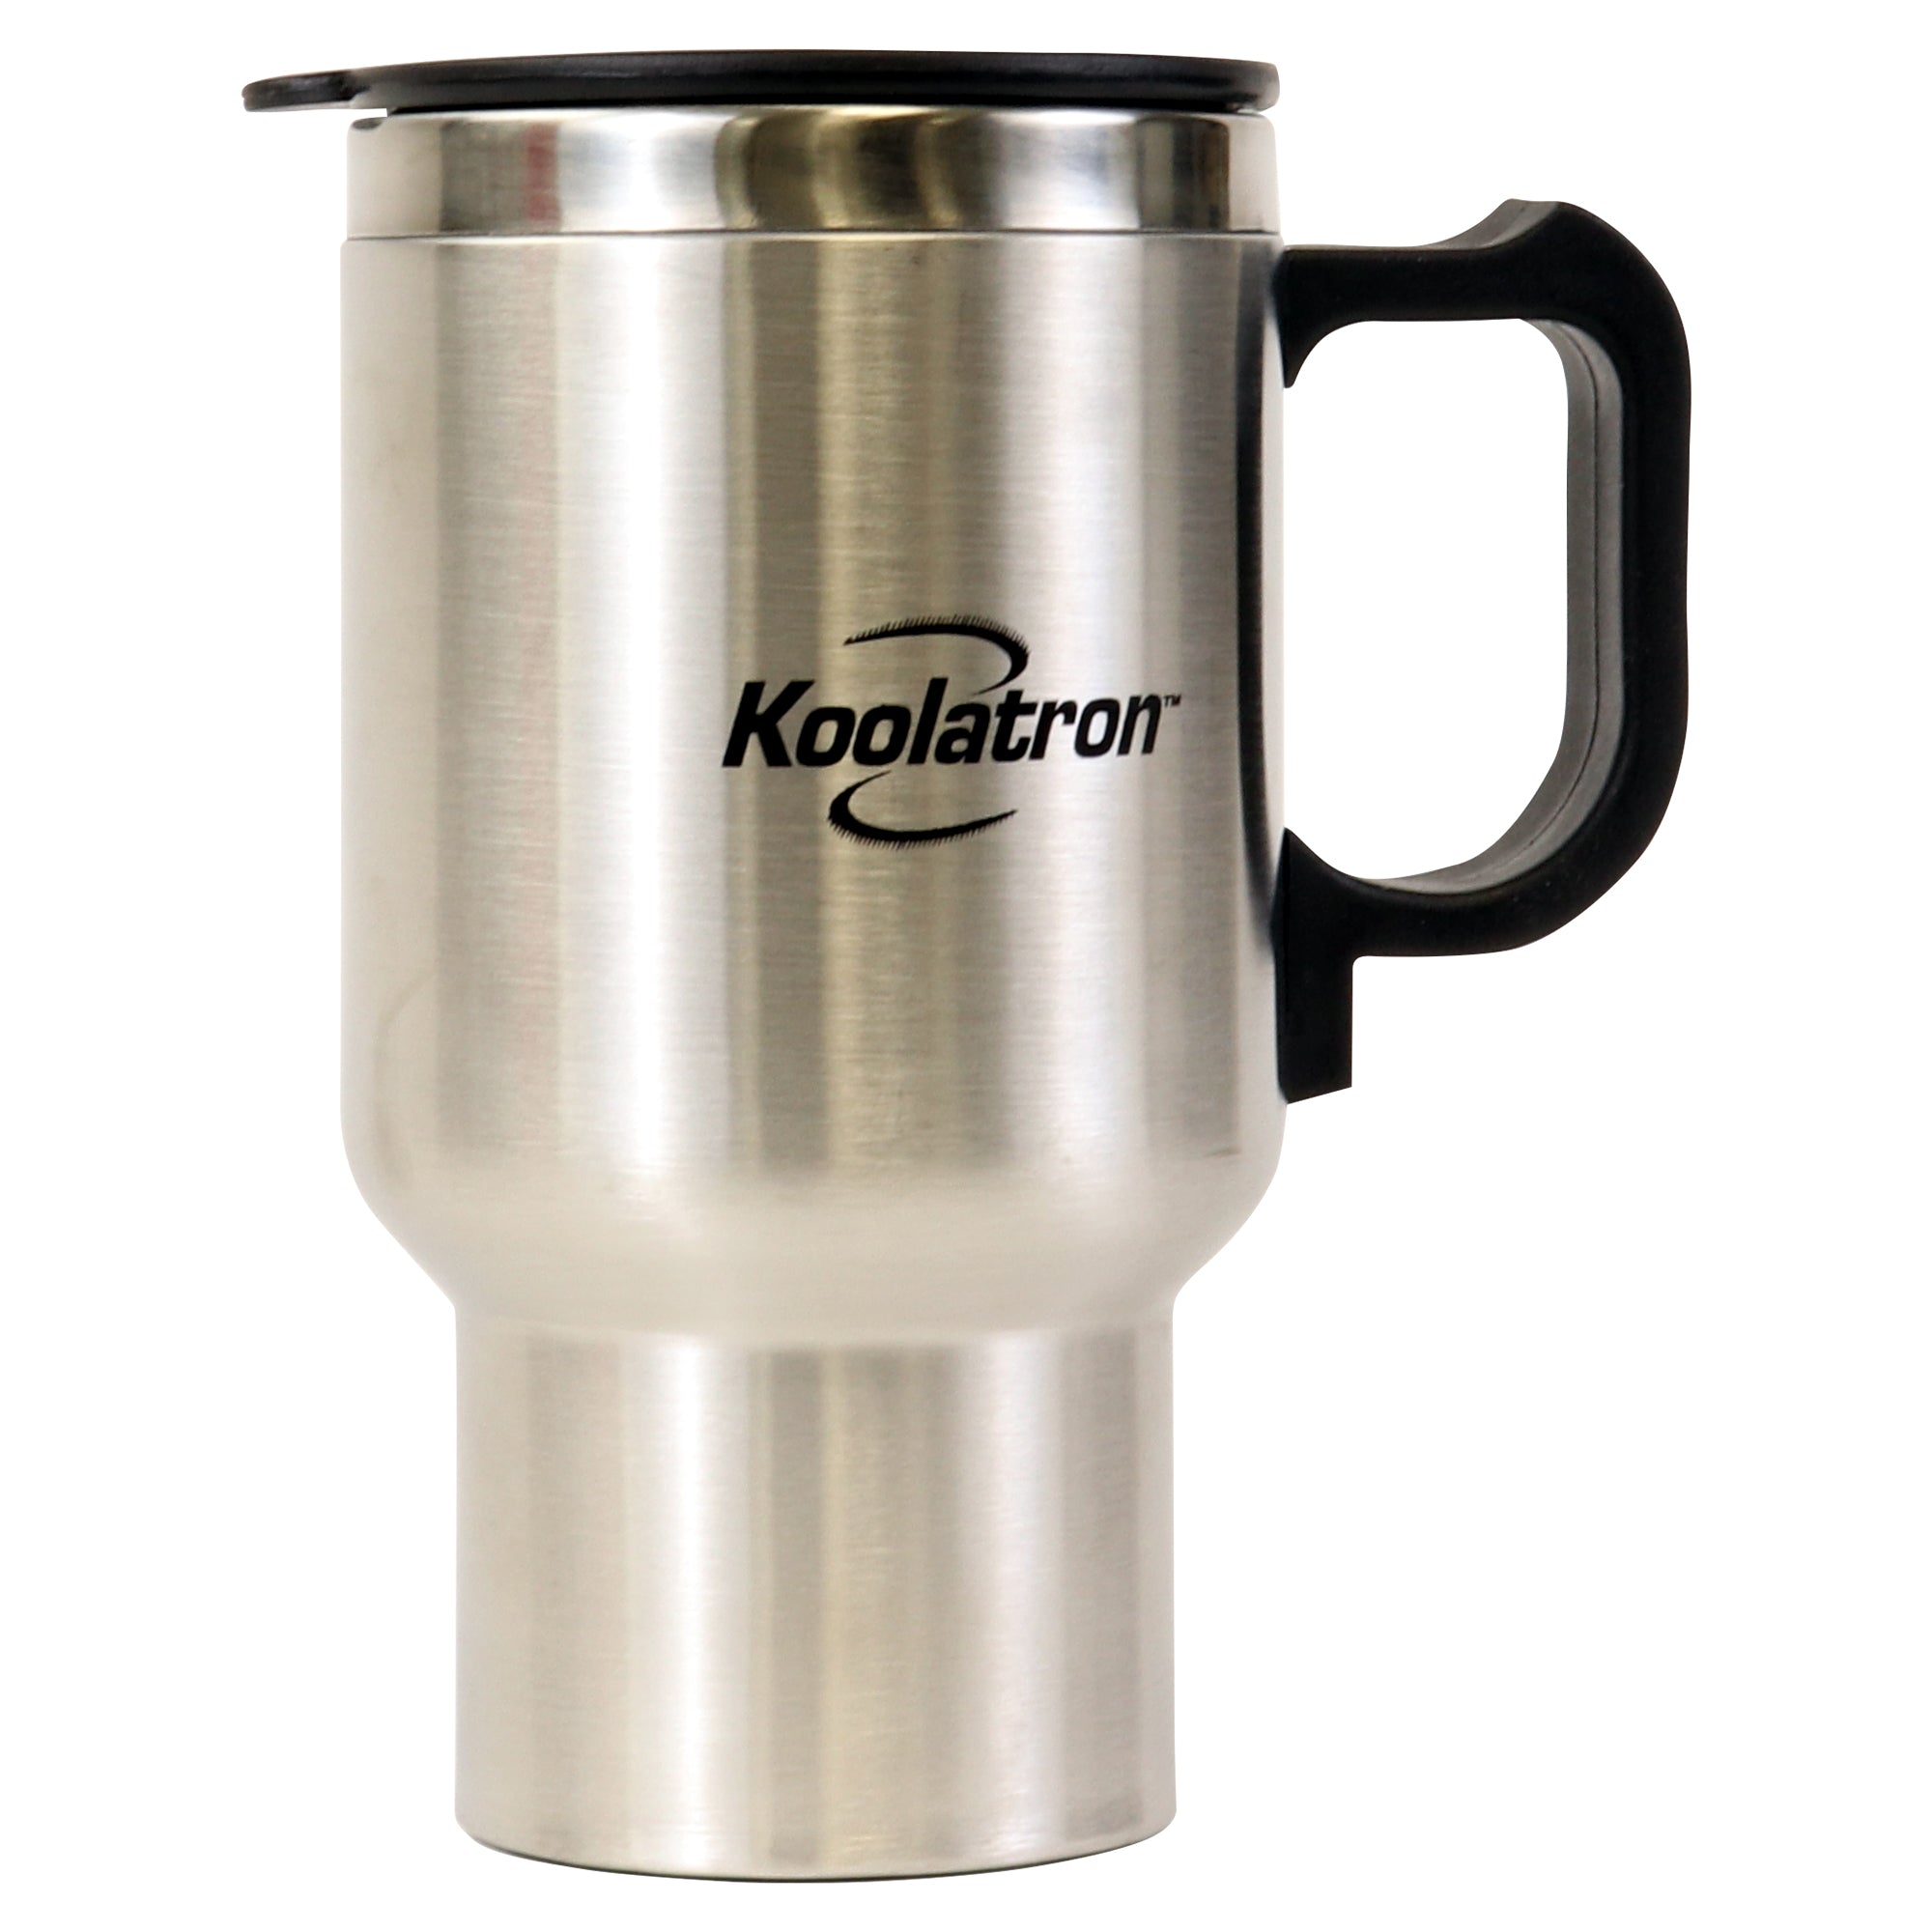 Koolatron 12V Insulated Vacuum Flask with Heater, 1L Silver and Black  Stainless Steel, Push Button Dispenser, for Car, SUV, Truck, RV, Boat